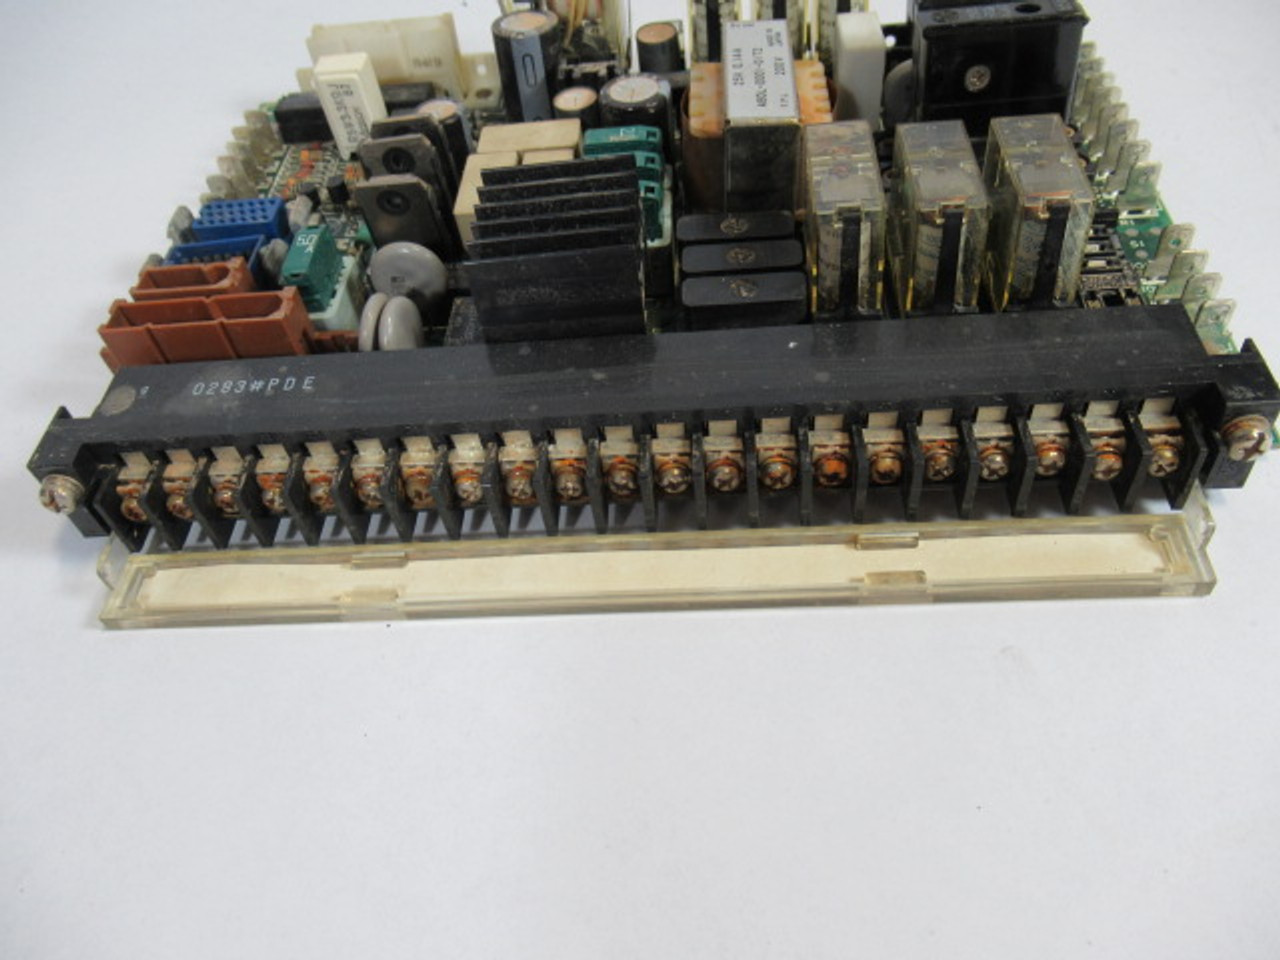 Fanuc A16B-1310-0530/17D Robotic Input Board *Missing Components* ! AS IS !